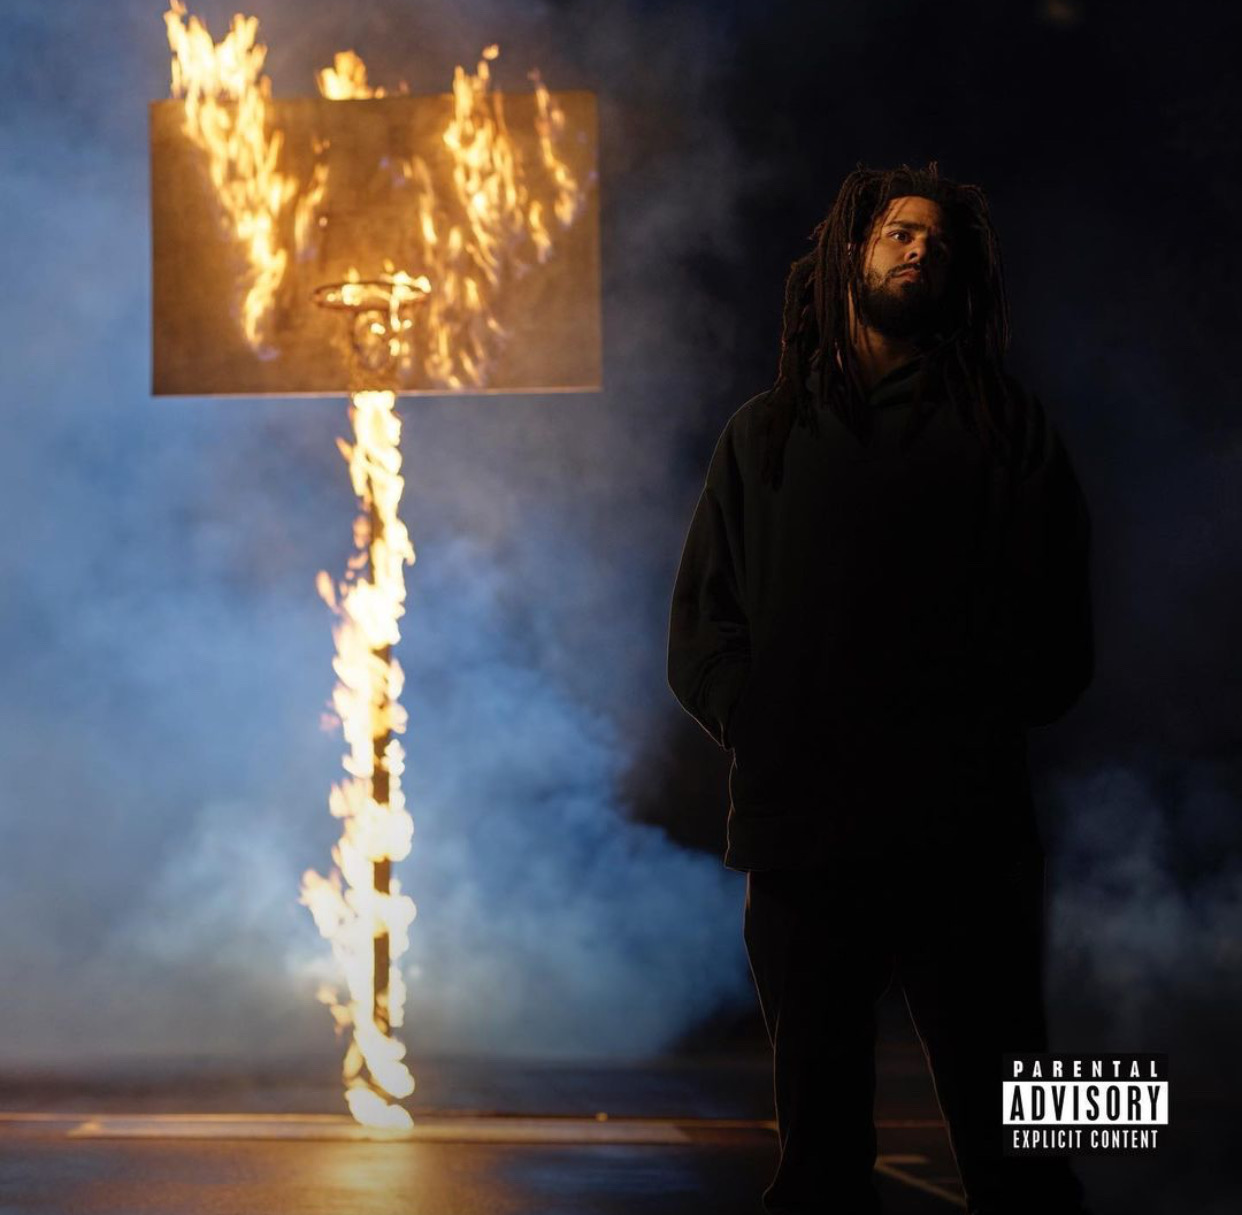 MUSIC REVIEWS, NEWS, STREAMS AND DOWNLOADS Listen to J. Cole’s new album ‘The Off-Season’